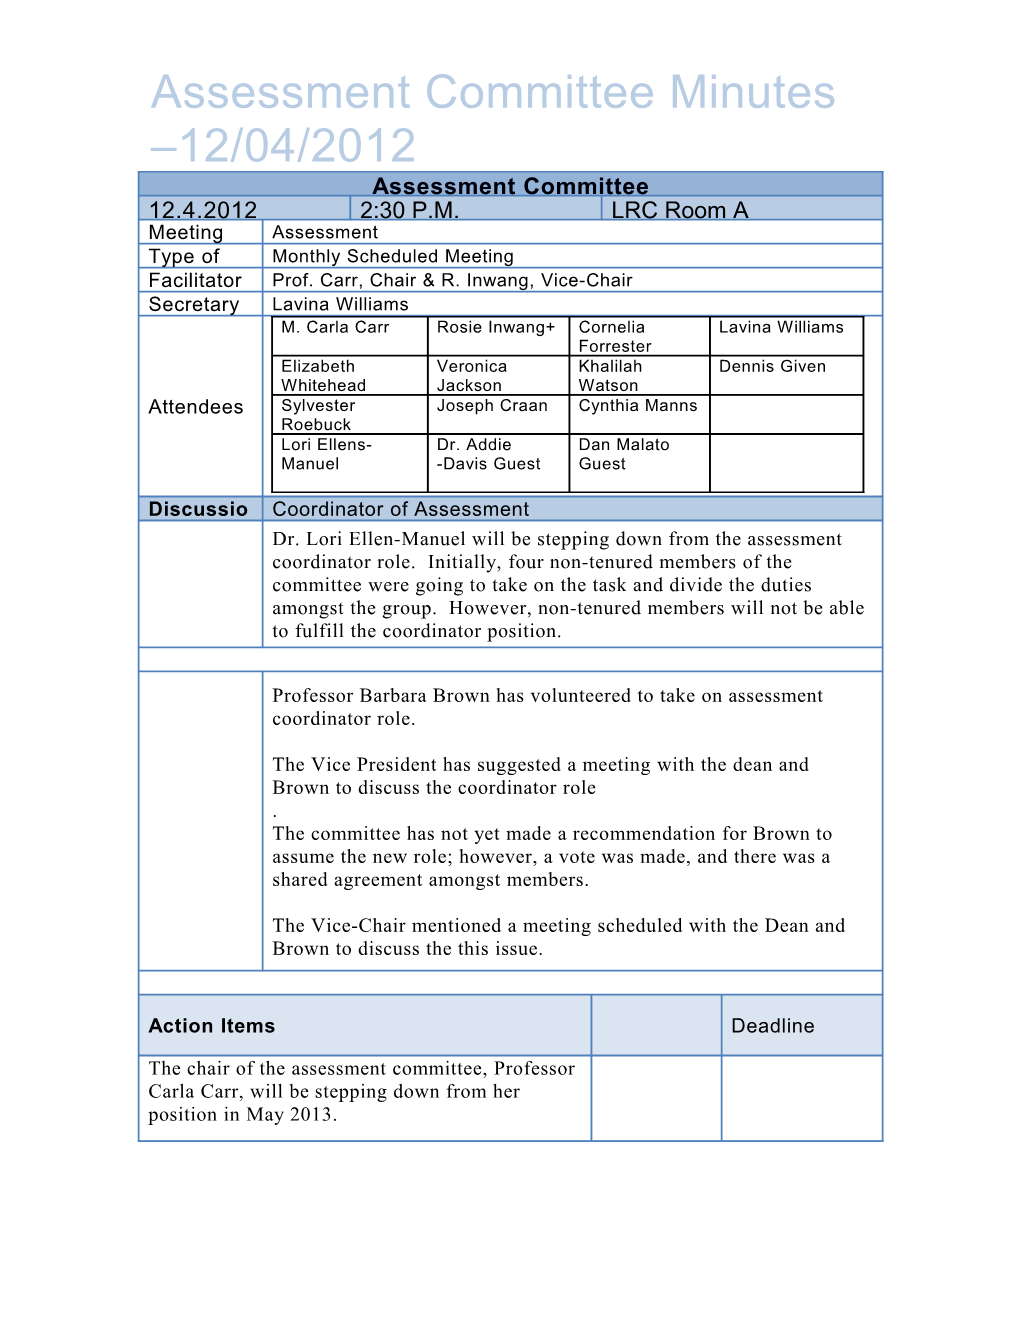 Assessment Committee Minutes 12/04/2012